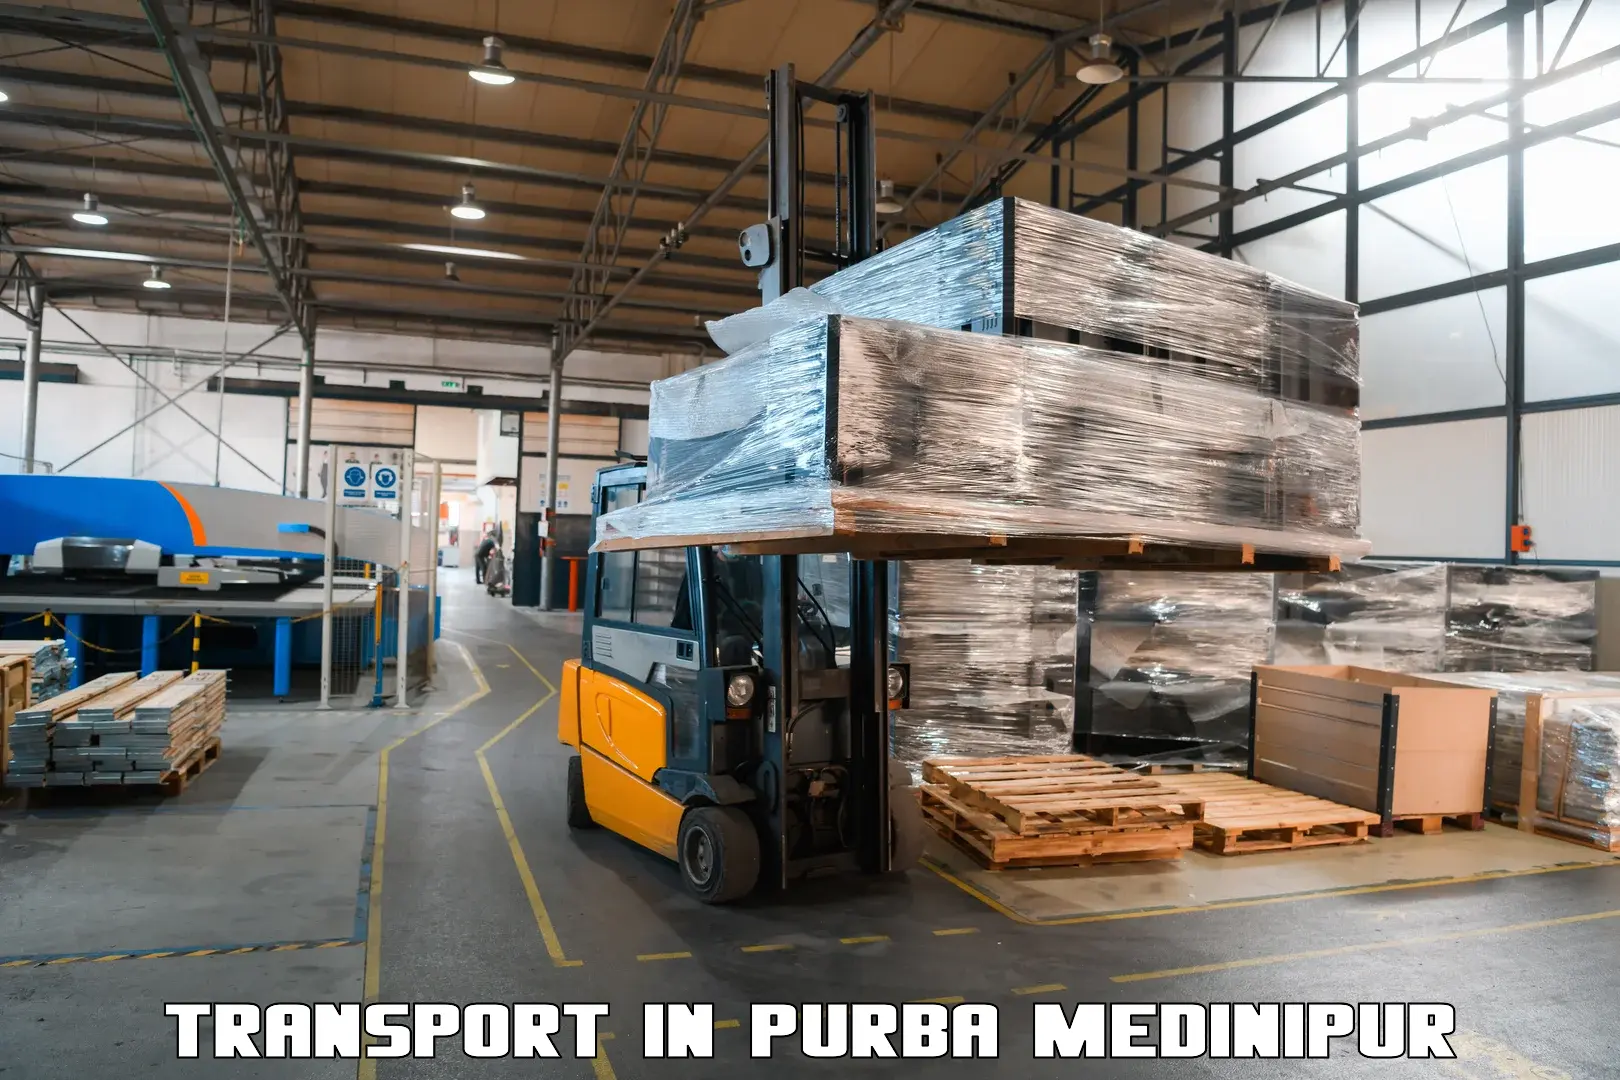 Vehicle transport services in Purba Medinipur